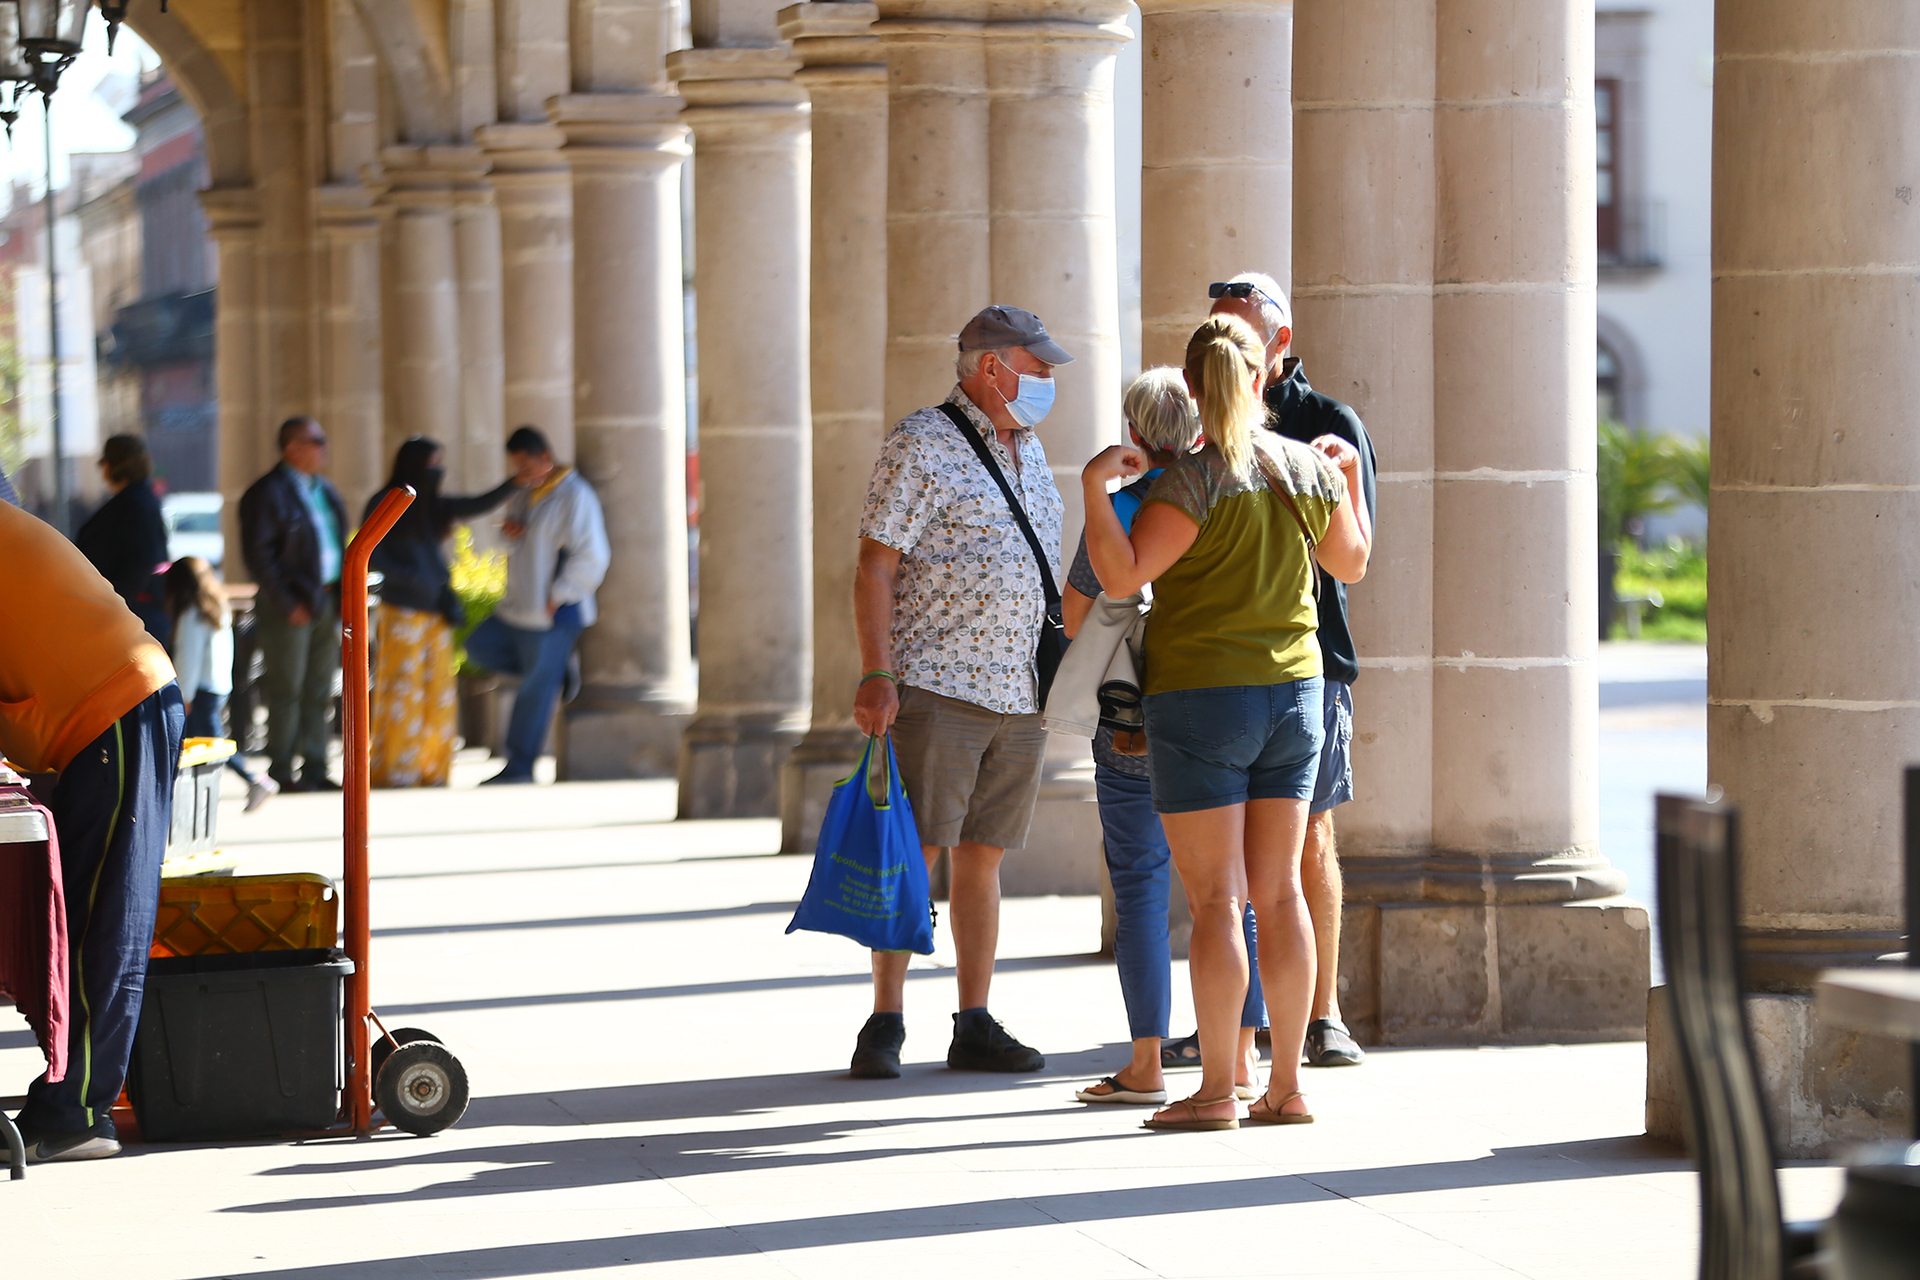 They report the arrival of 91 thousand tourists to Durango during the first week of vacation